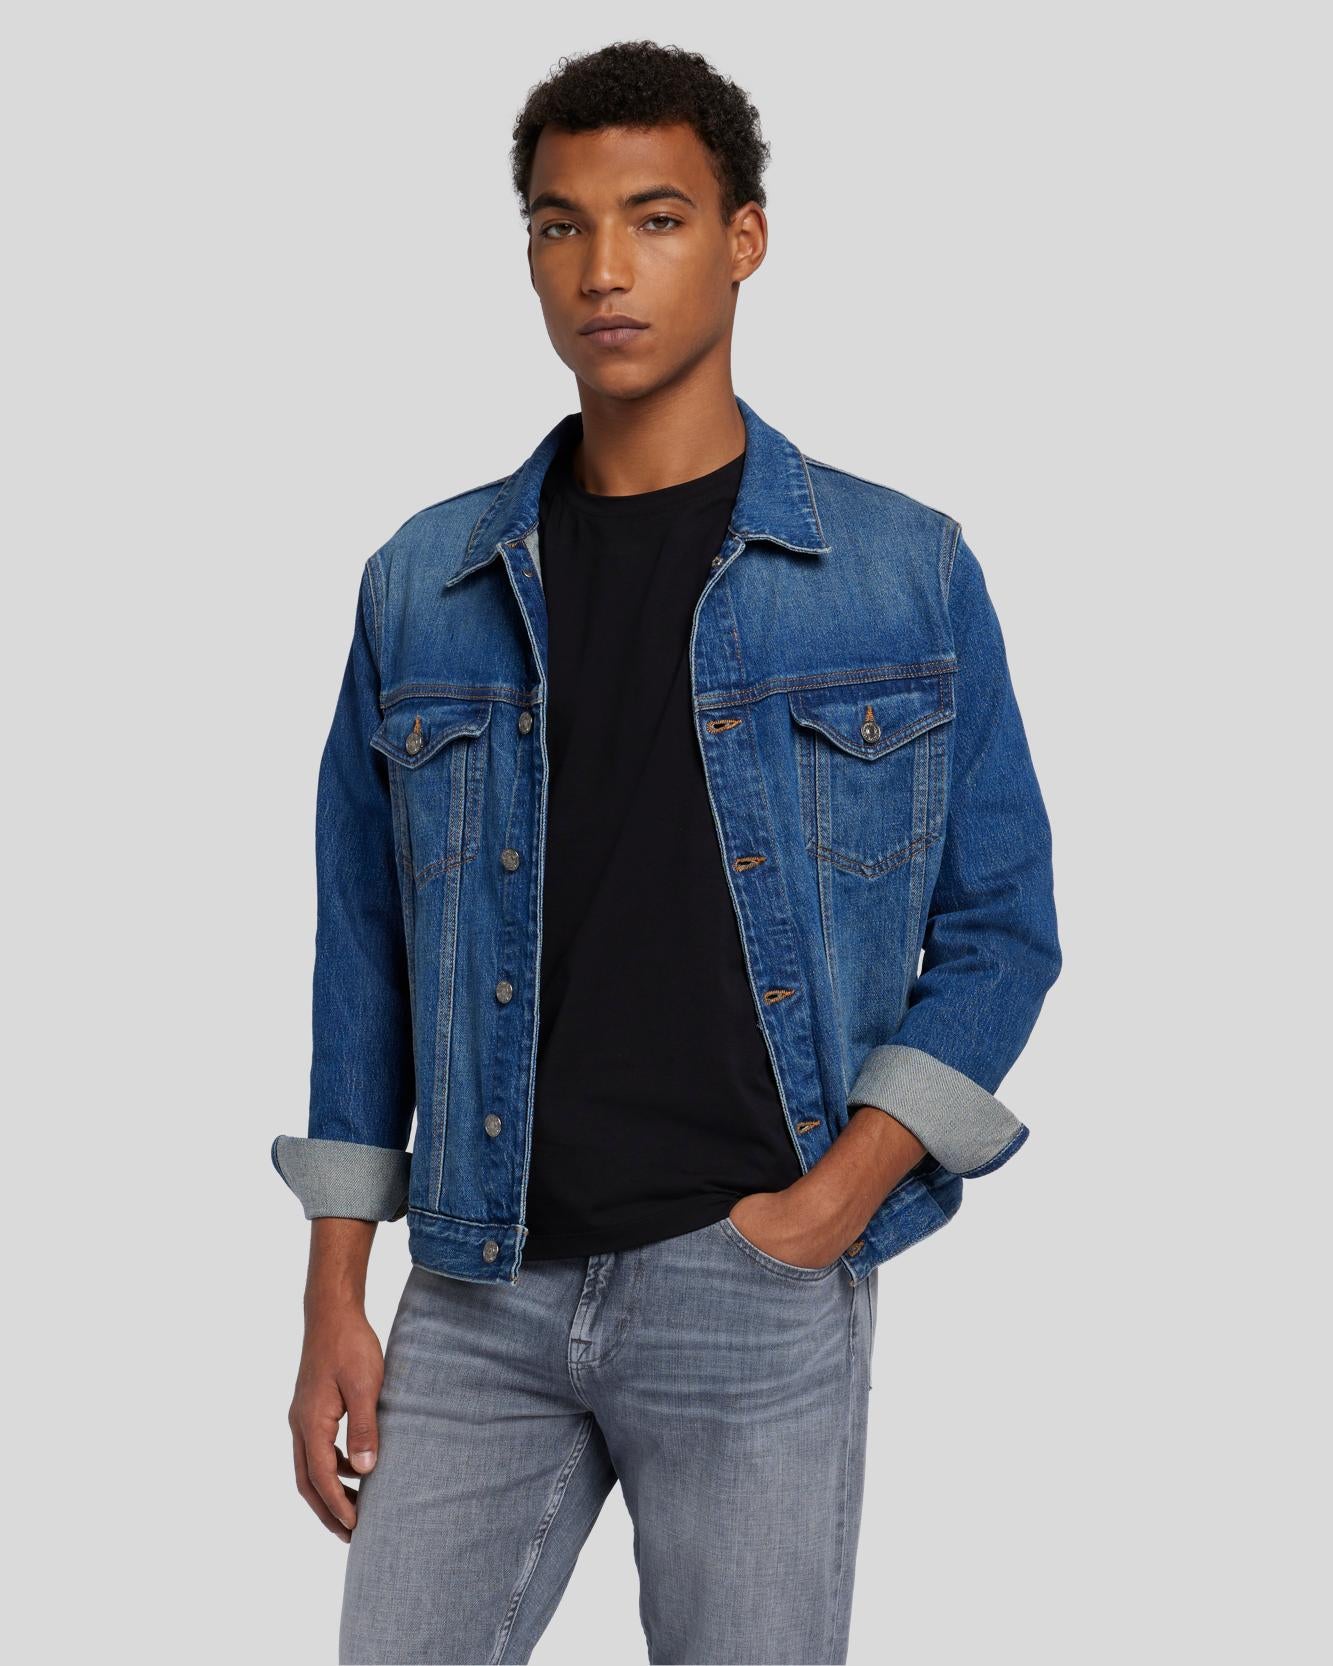 The 25 Best Denim Jackets to Buy Now and Wear Always | Denim jacket men, Designer  denim jacket, Mens jackets